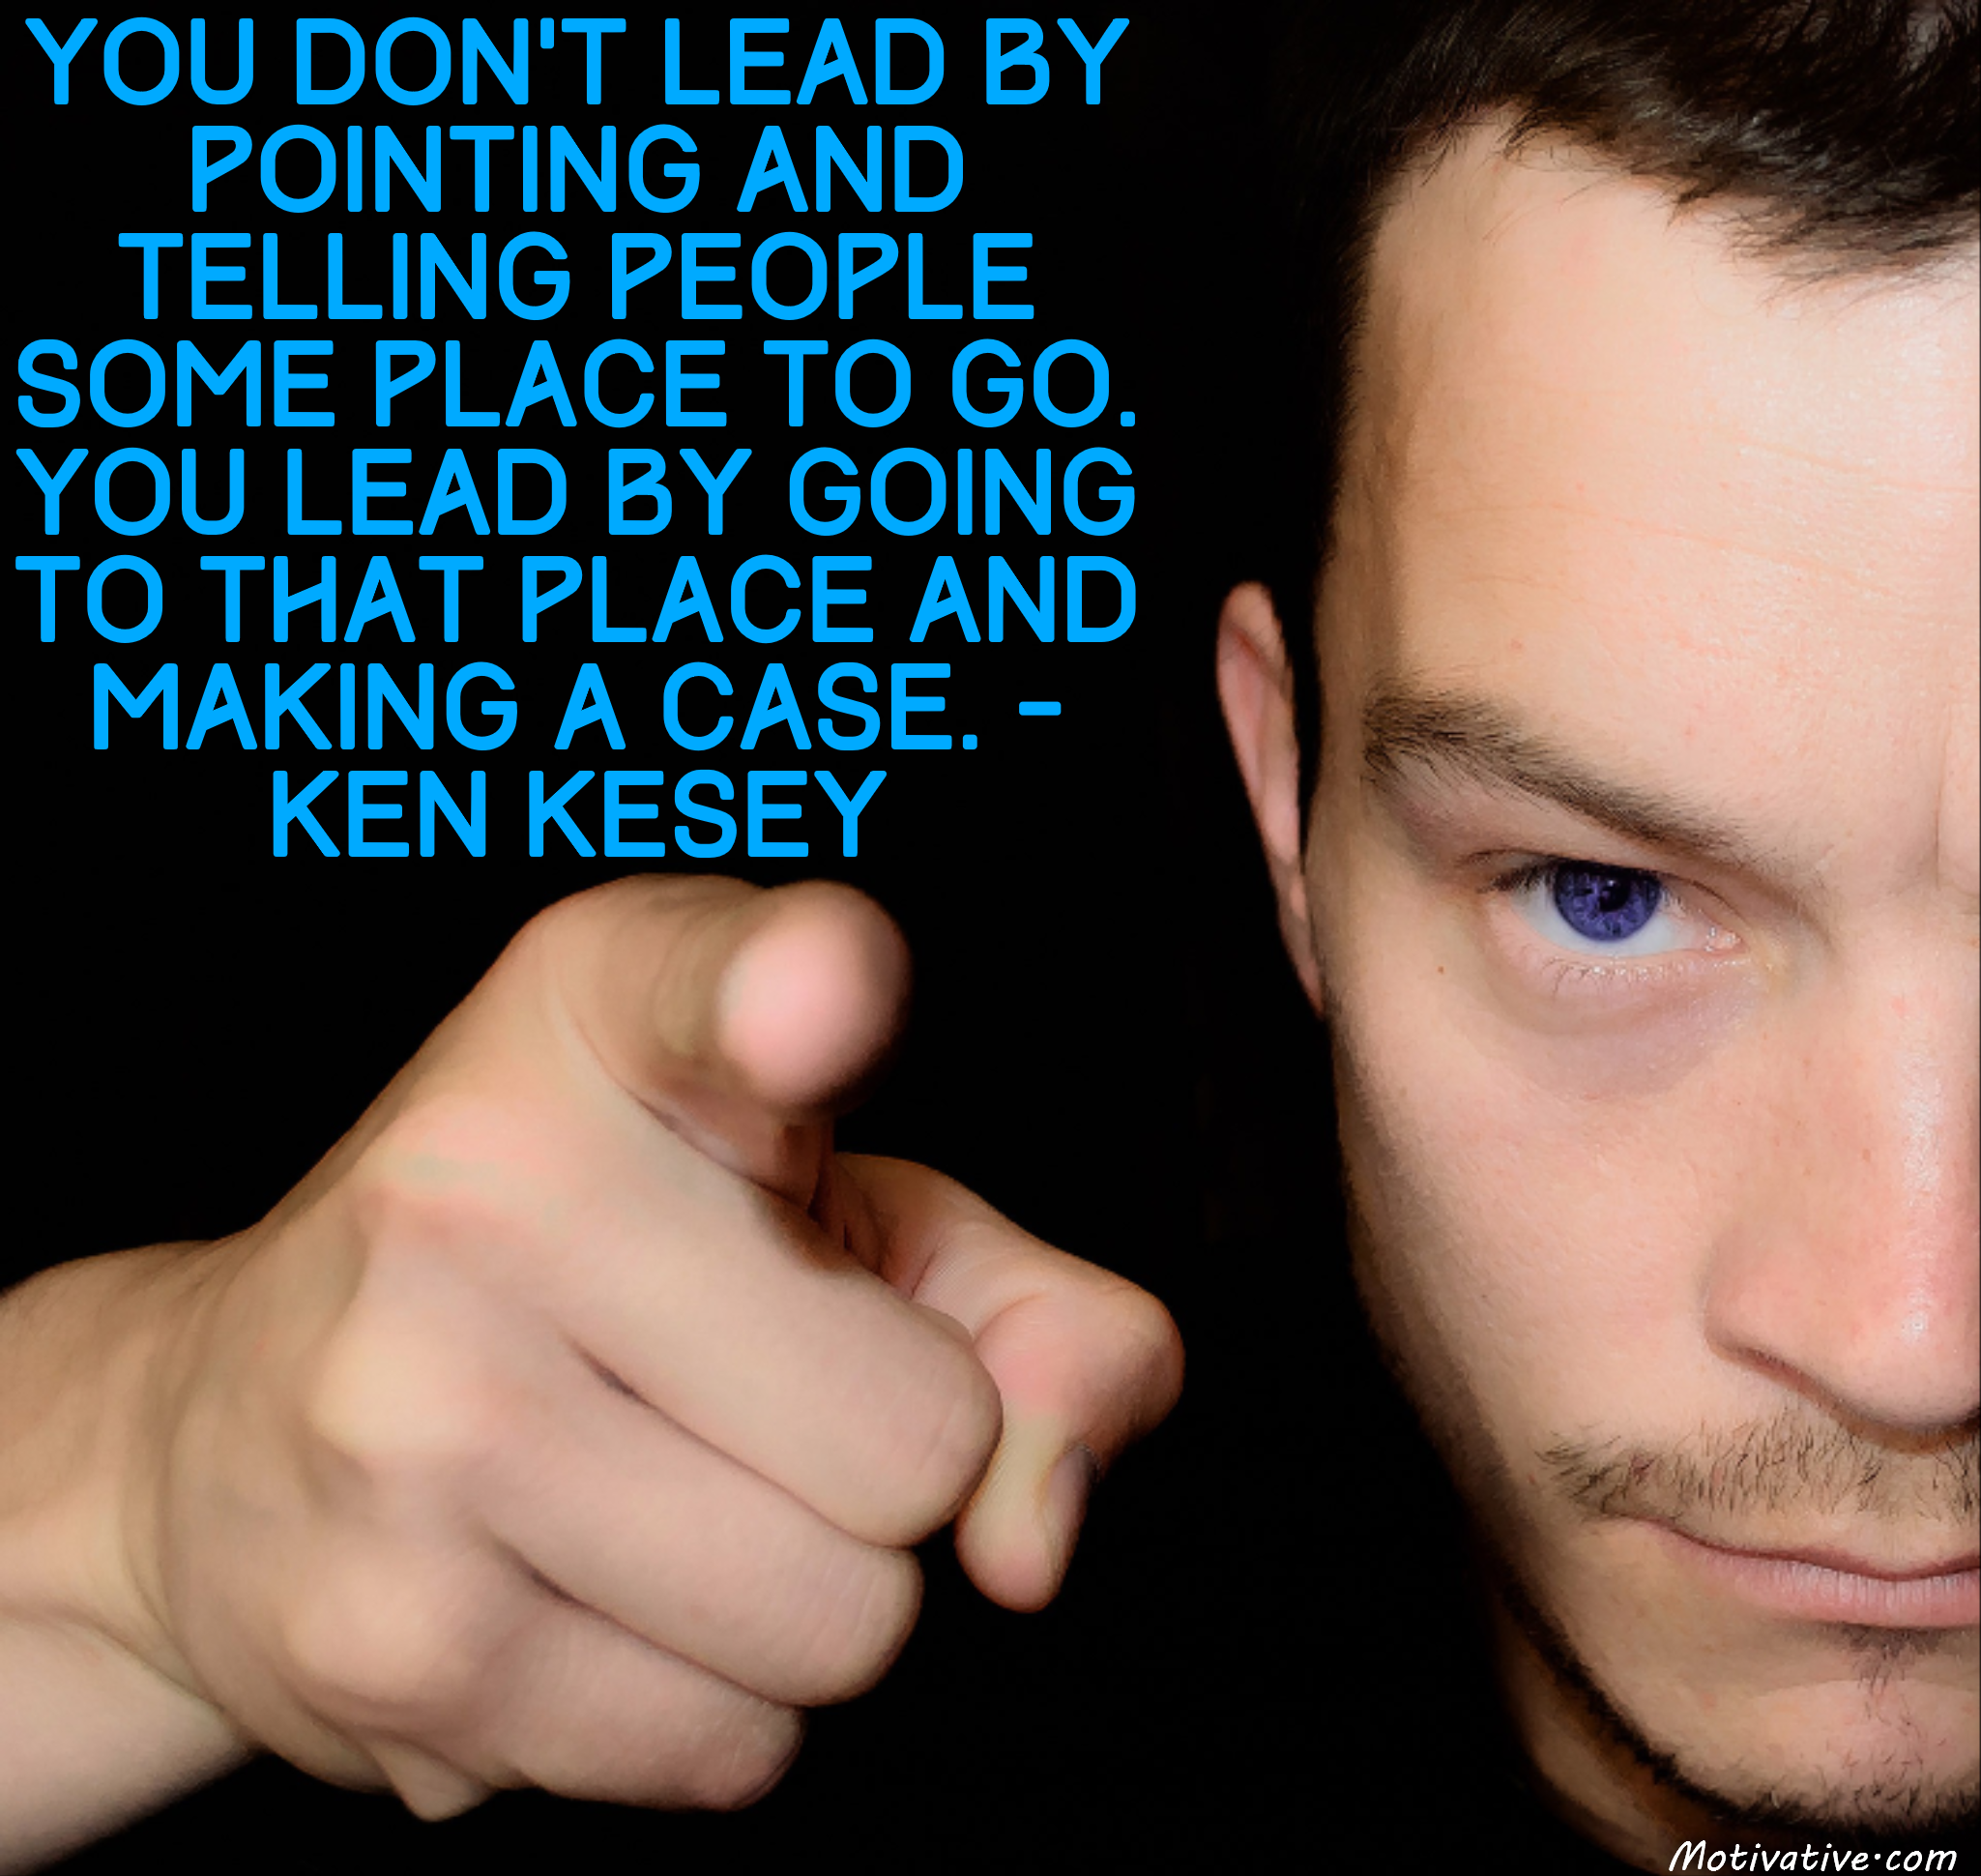 You don’t lead by pointing and telling people some place to go. You lead by going to that place and making a case. – Ken Kesey